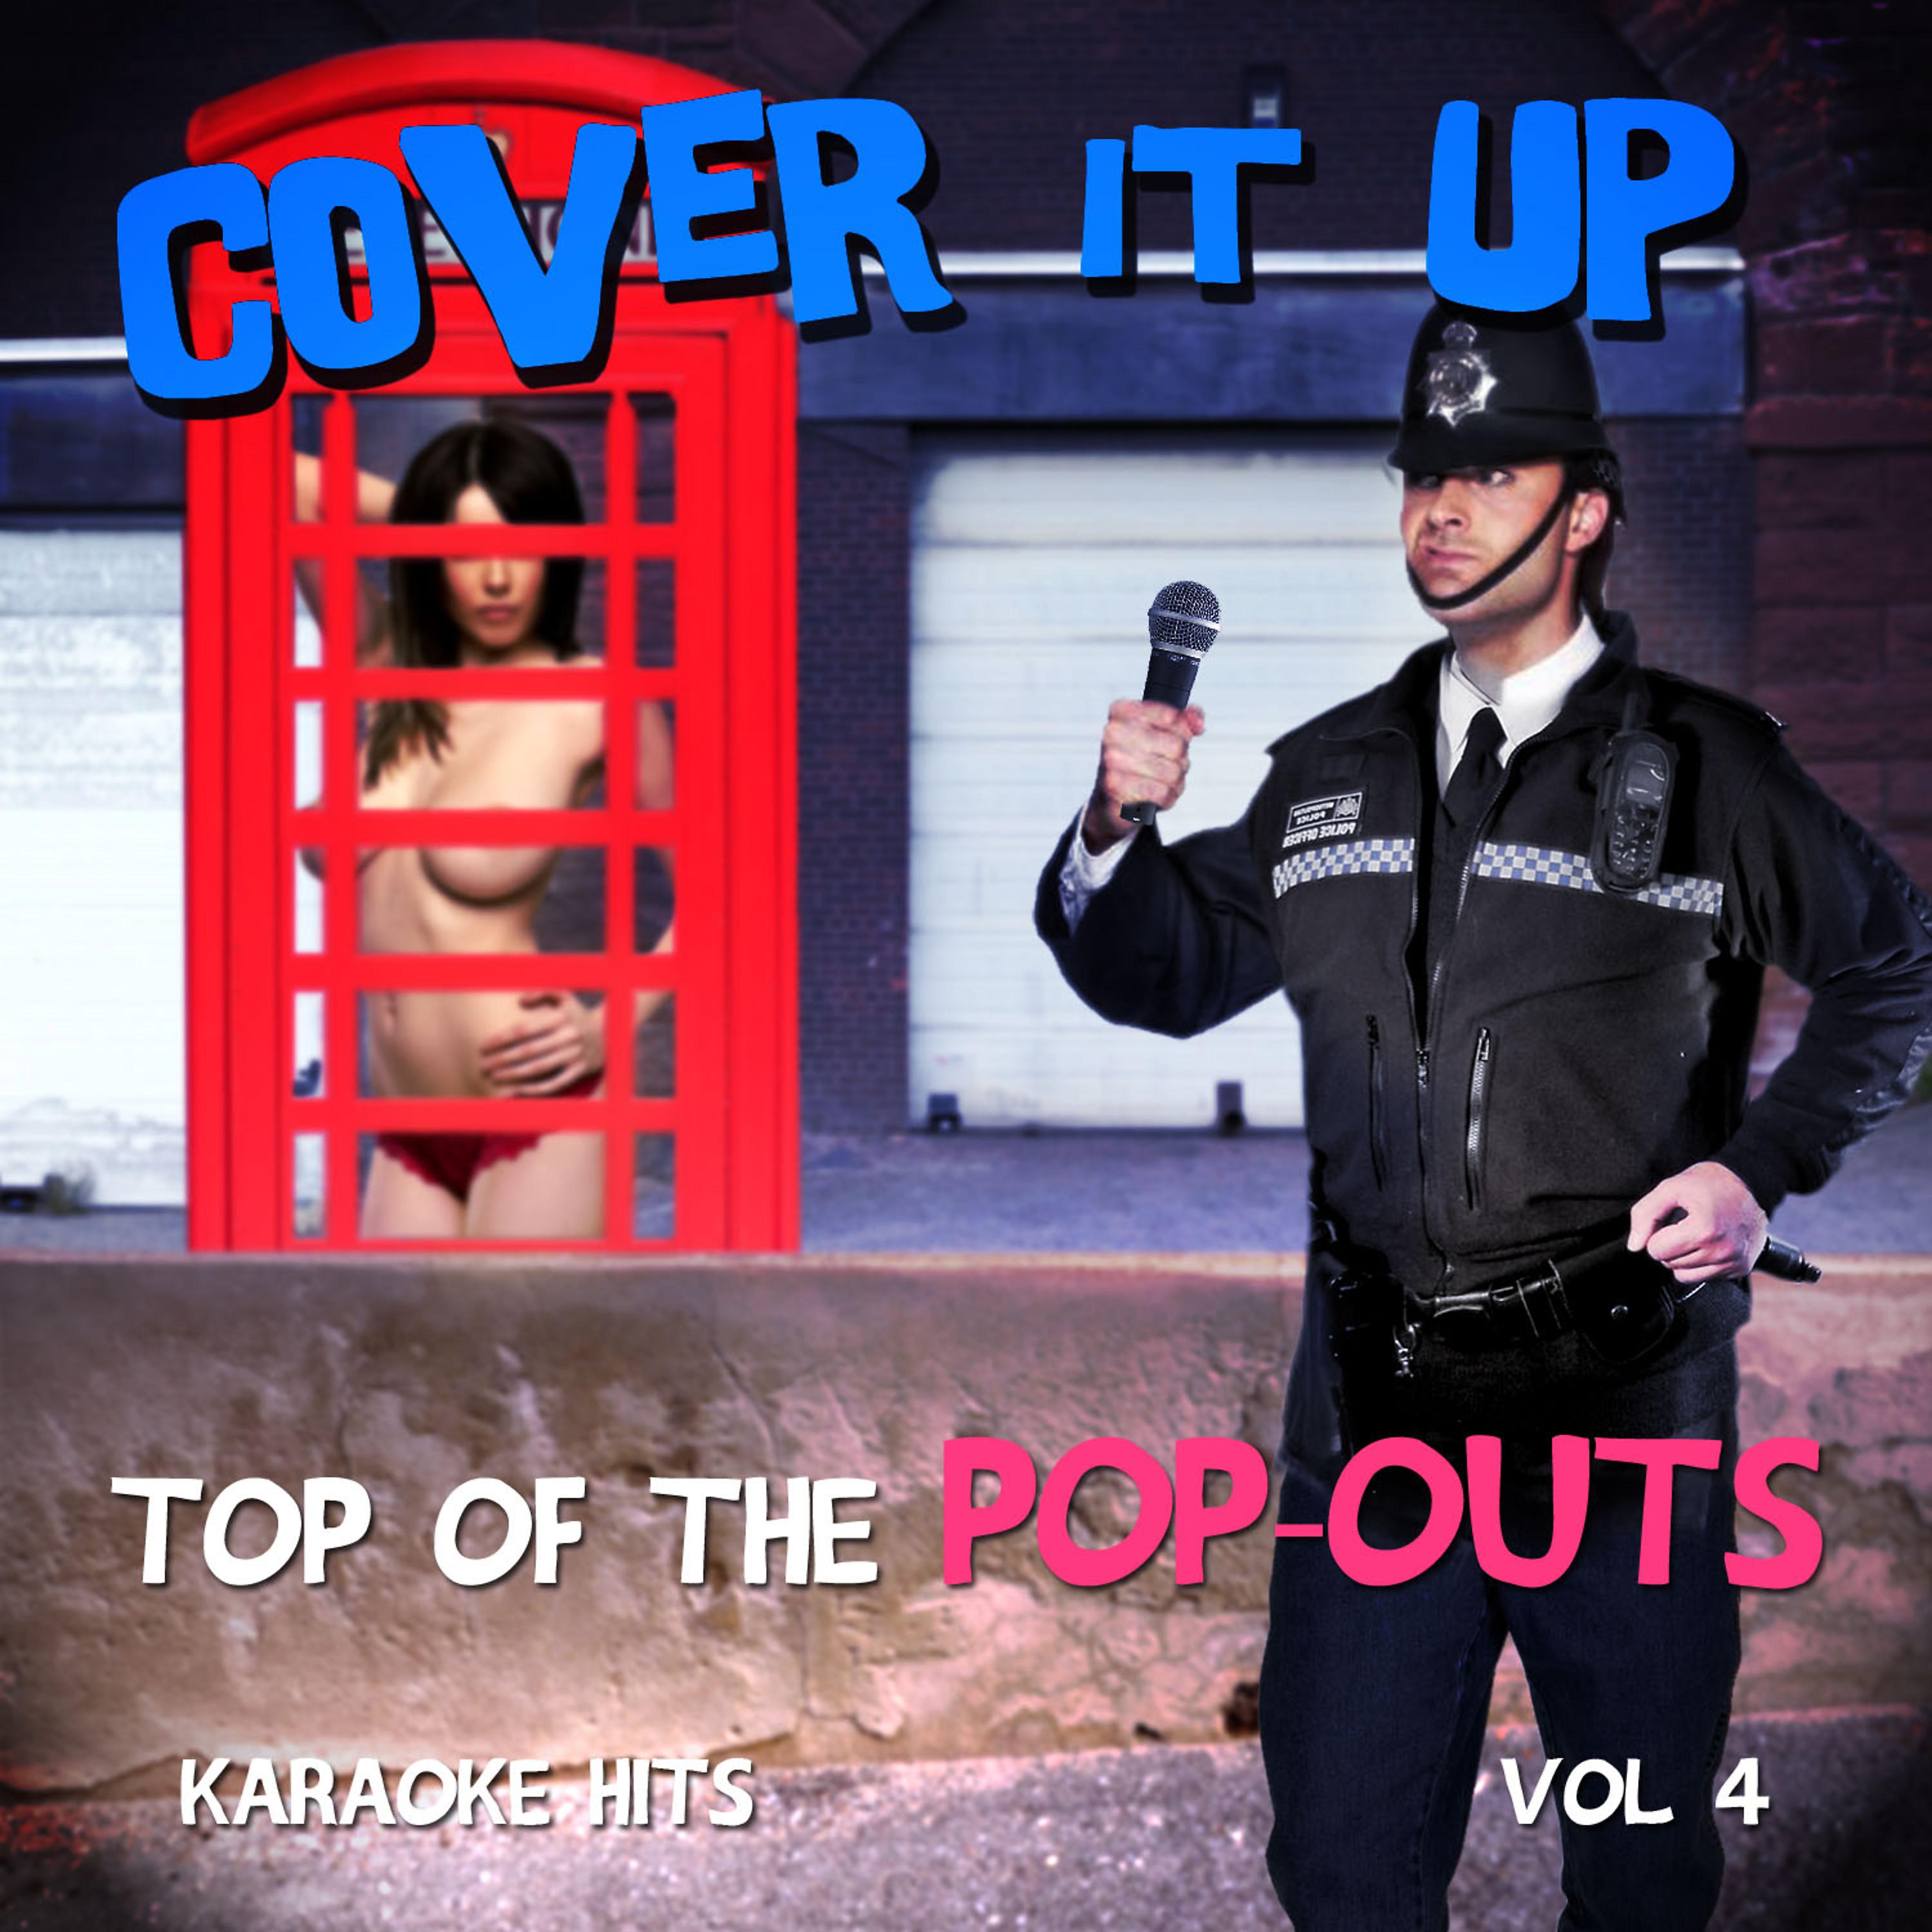 Постер альбома Cover It up, Top of the Pop-Outs - Karaoke Hits, Vol. 4